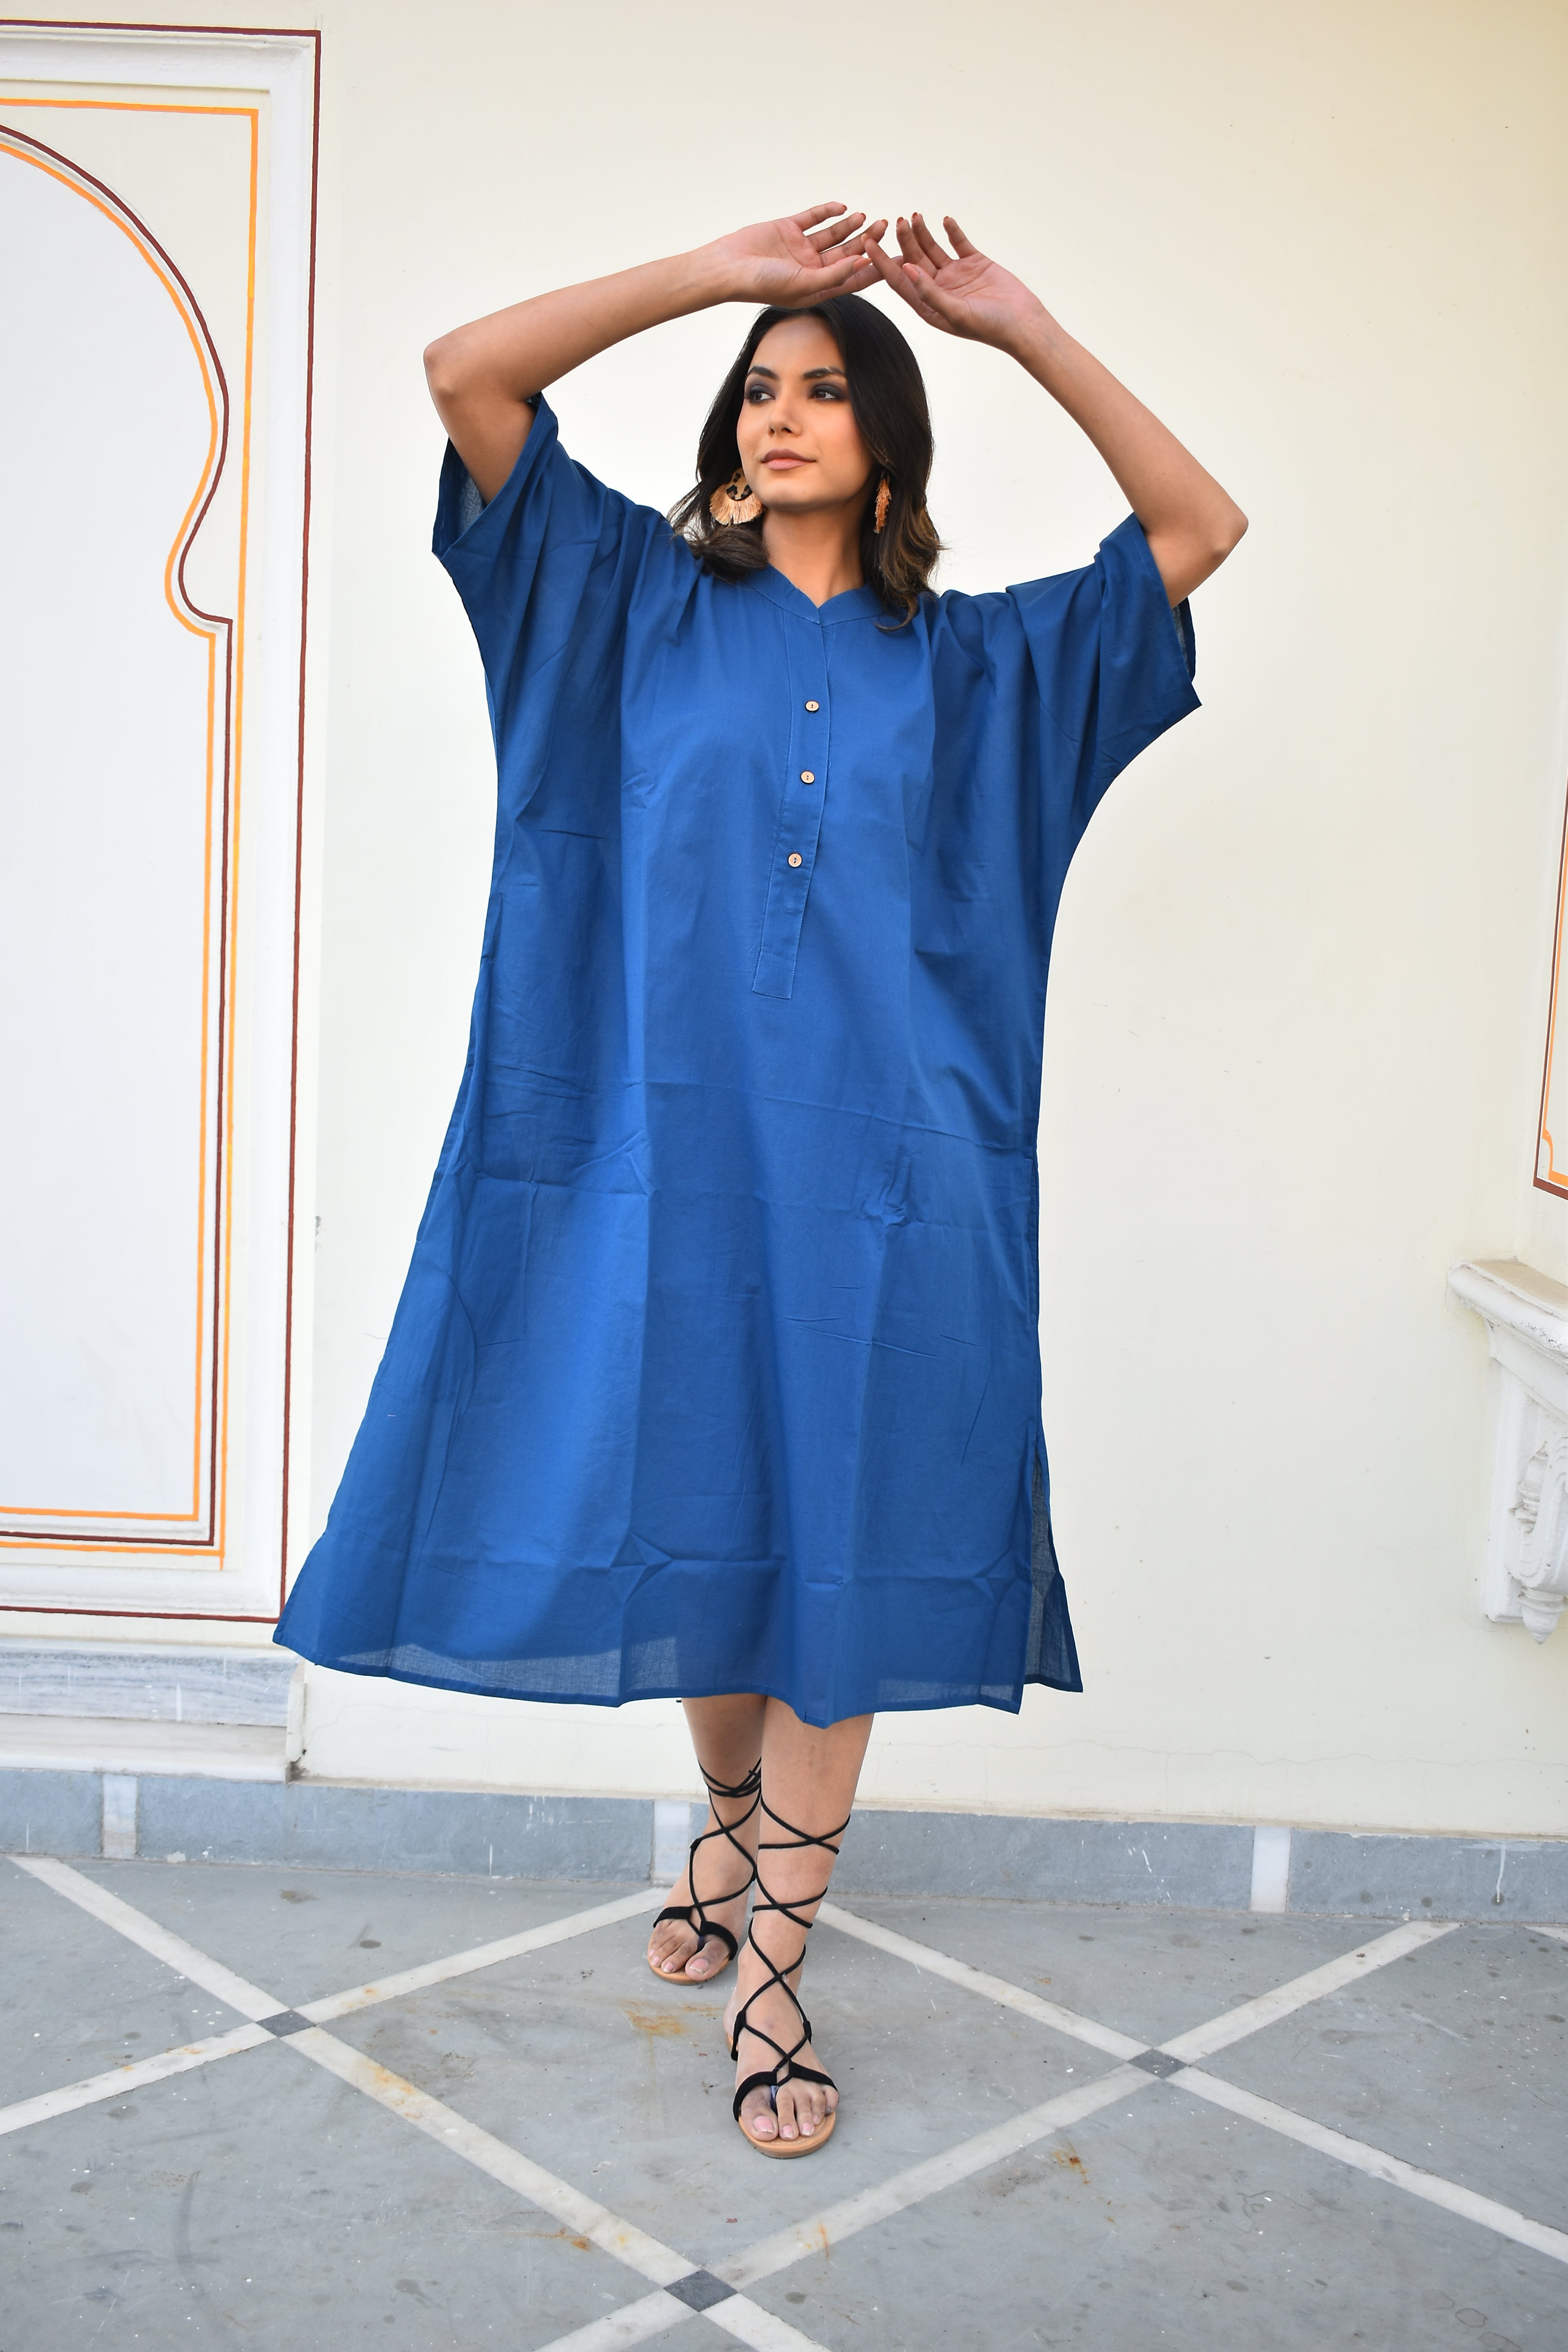 "Blue shirt dress in cotton: Timeless Australian fashion, combining style with comfort effortlessly."